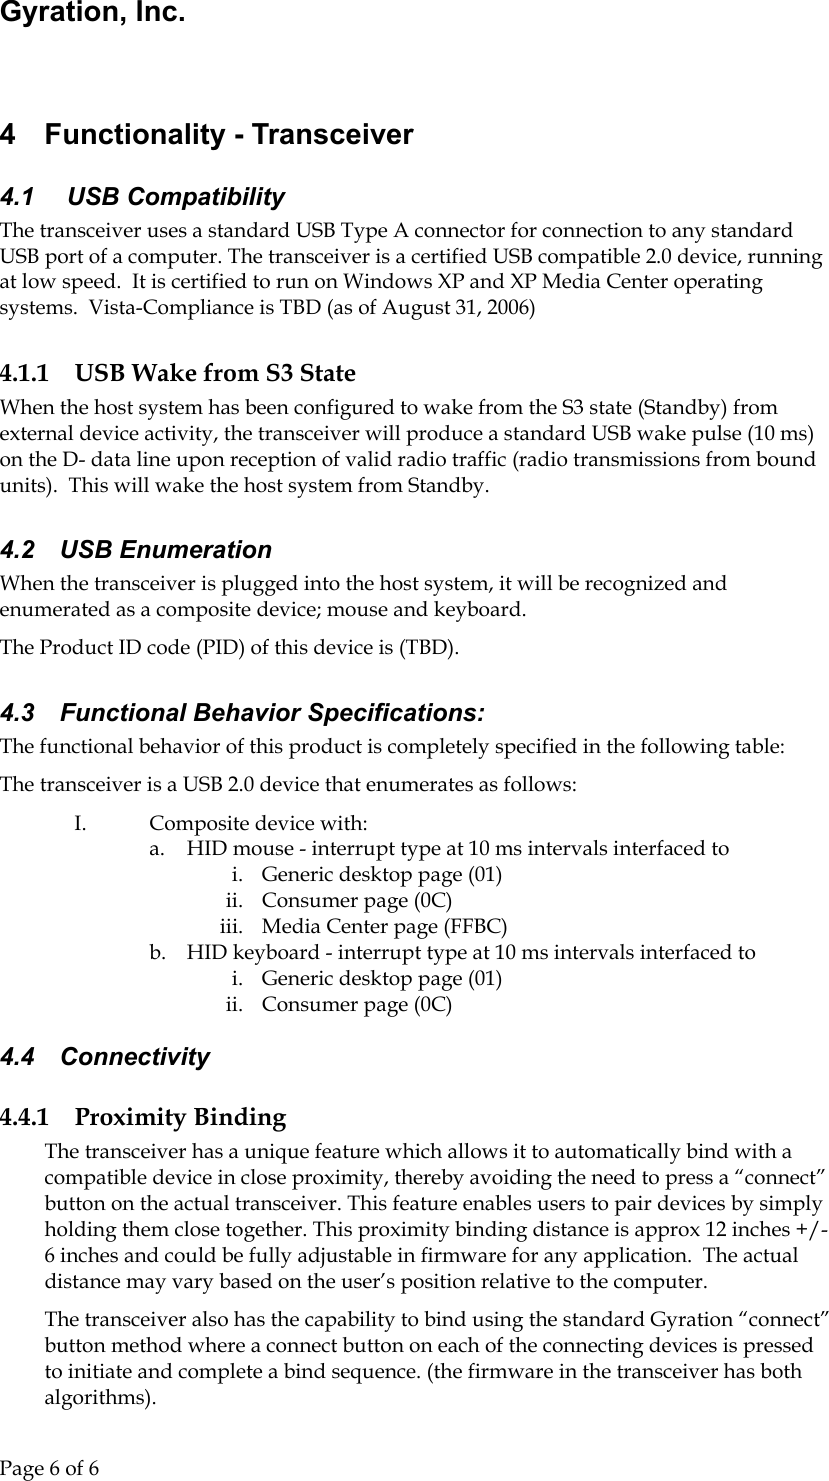 Gyration, Inc.     Page 6 of 6                                  4  Functionality - Transceiver 4.1   USB Compatibility The transceiver uses a standard USB Type A connector for connection to any standard USB port of a computer. The transceiver is a certified USB compatible 2.0 device, running at low speed.  It is certified to run on Windows XP and XP Media Center operating systems.  Vista-Compliance is TBD (as of August 31, 2006) 4.1.1  USB Wake from S3 State When the host system has been configured to wake from the S3 state (Standby) from external device activity, the transceiver will produce a standard USB wake pulse (10 ms) on the D- data line upon reception of valid radio traffic (radio transmissions from bound units).  This will wake the host system from Standby. 4.2 USB Enumeration When the transceiver is plugged into the host system, it will be recognized and enumerated as a composite device; mouse and keyboard.   The Product ID code (PID) of this device is (TBD).   4.3  Functional Behavior Specifications: The functional behavior of this product is completely specified in the following table: The transceiver is a USB 2.0 device that enumerates as follows: I.  Composite device with: a.  HID mouse - interrupt type at 10 ms intervals interfaced to i.  Generic desktop page (01) ii.  Consumer page (0C) iii.  Media Center page (FFBC) b.  HID keyboard - interrupt type at 10 ms intervals interfaced to i.  Generic desktop page (01) ii.  Consumer page (0C) 4.4 Connectivity 4.4.1 Proximity Binding The transceiver has a unique feature which allows it to automatically bind with a compatible device in close proximity, thereby avoiding the need to press a “connect” button on the actual transceiver. This feature enables users to pair devices by simply holding them close together. This proximity binding distance is approx 12 inches +/- 6 inches and could be fully adjustable in firmware for any application.  The actual distance may vary based on the user’s position relative to the computer. The transceiver also has the capability to bind using the standard Gyration “connect” button method where a connect button on each of the connecting devices is pressed to initiate and complete a bind sequence. (the firmware in the transceiver has both algorithms). 